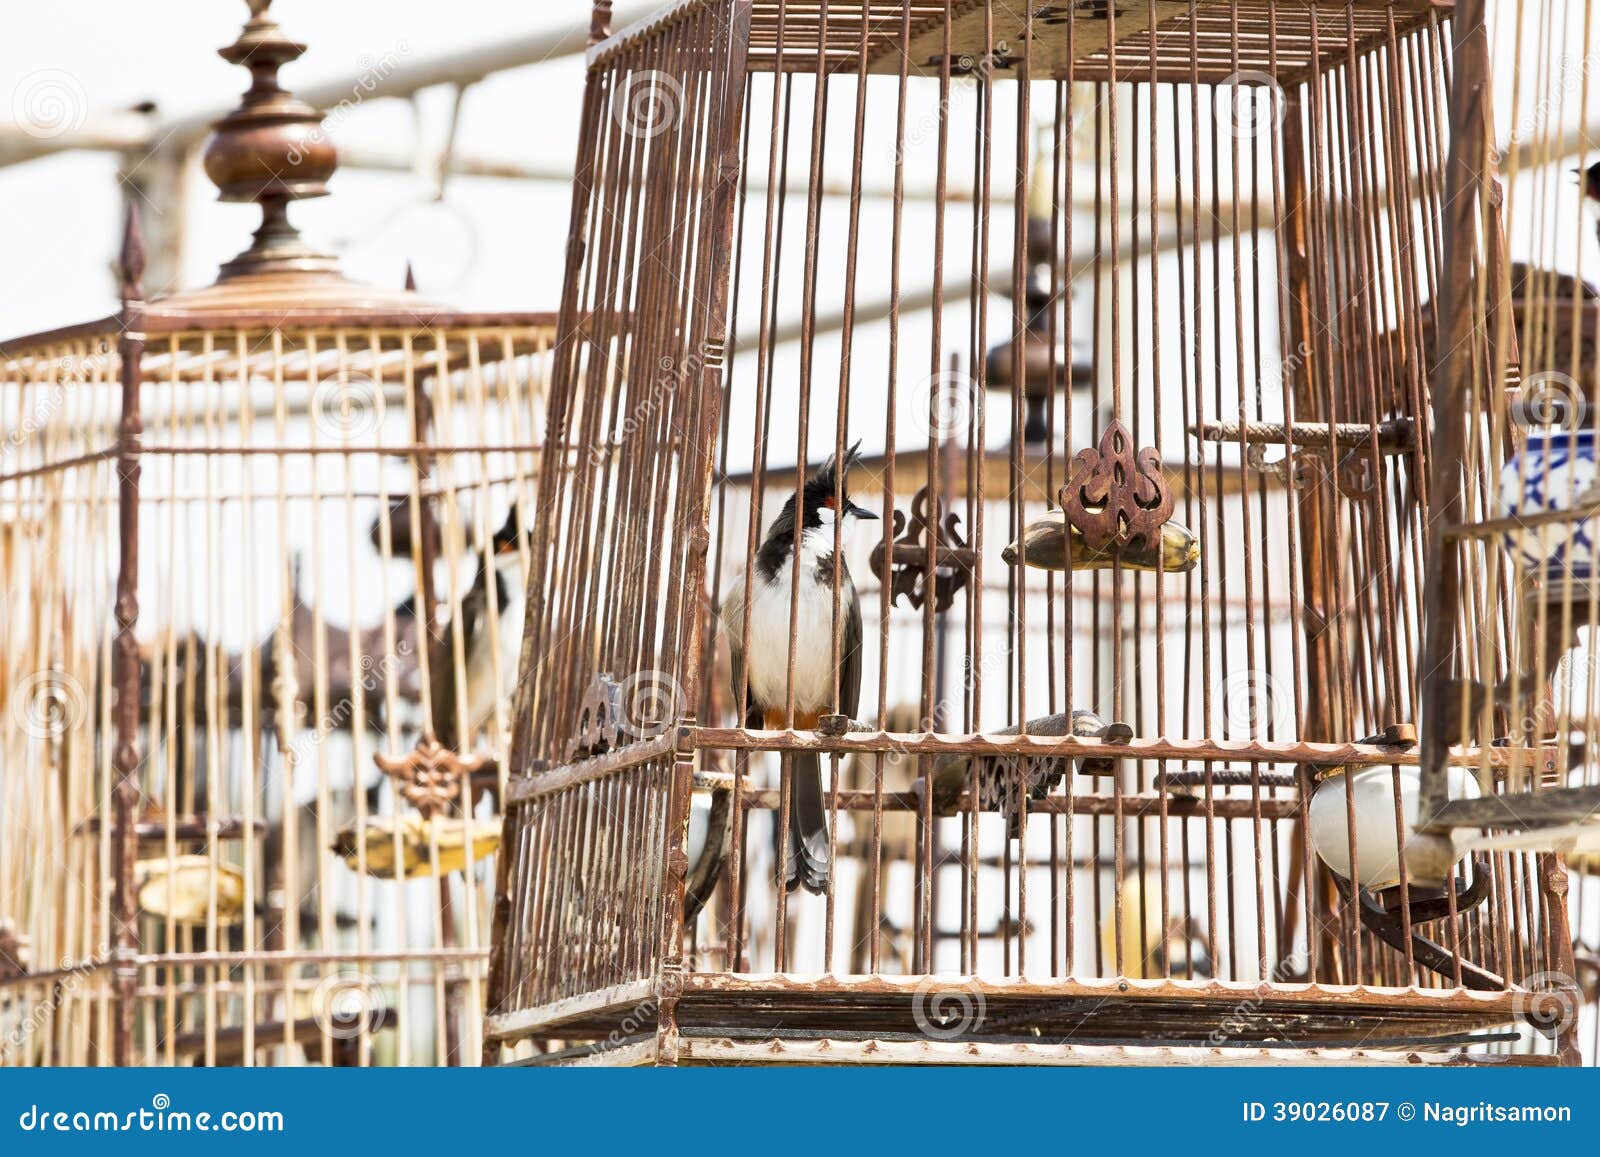 red-whiskered-bulbul-birdcage-sound-competitions-thailand-39026087.jpg